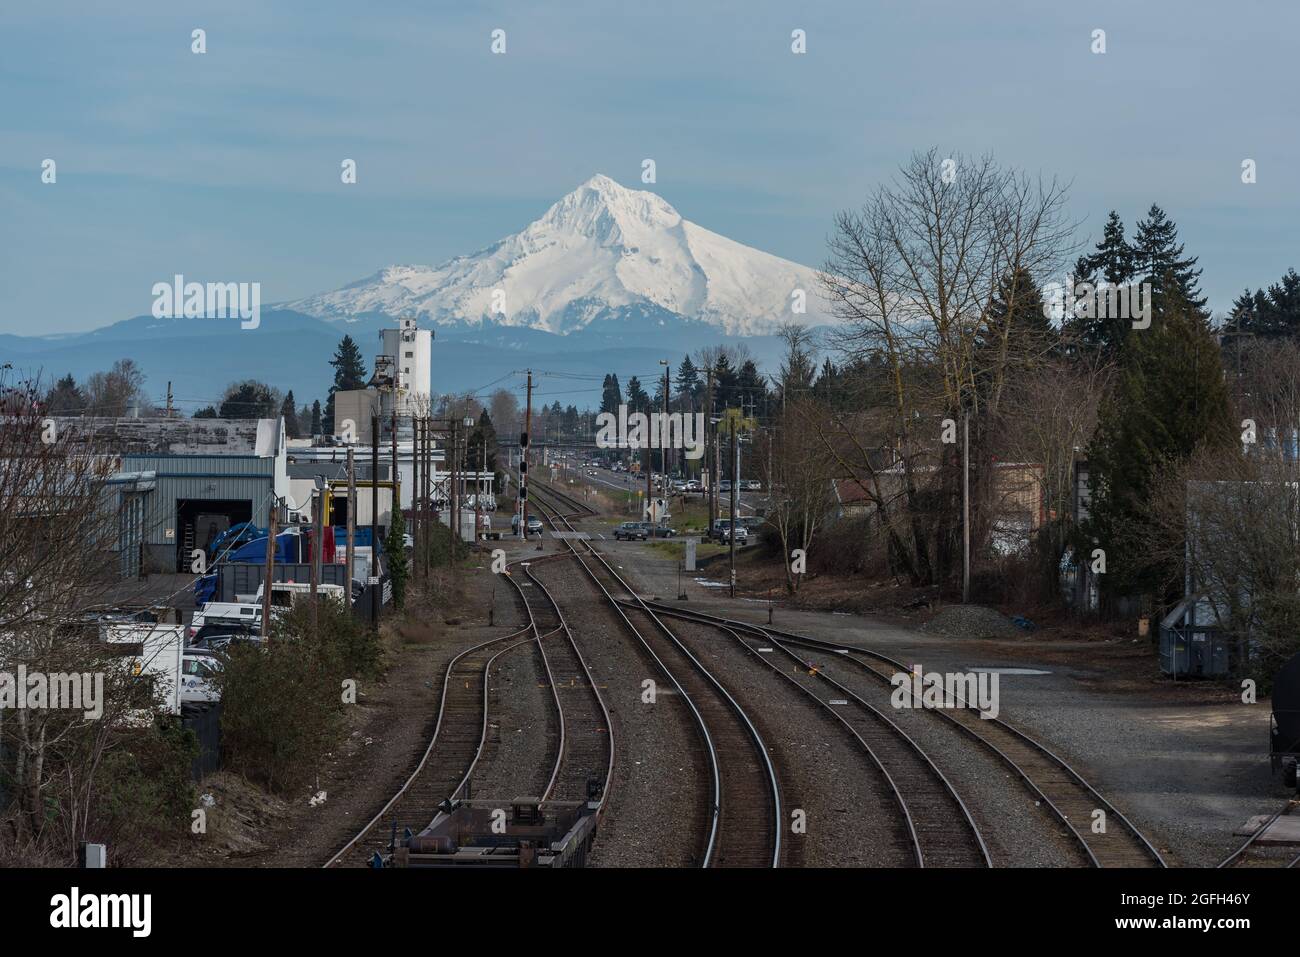 Nature and urban together with views of snowy Mt Hood mountain peak over industrial train tracks in Portland, Oregon, Pacific Northwest United States Stock Photo